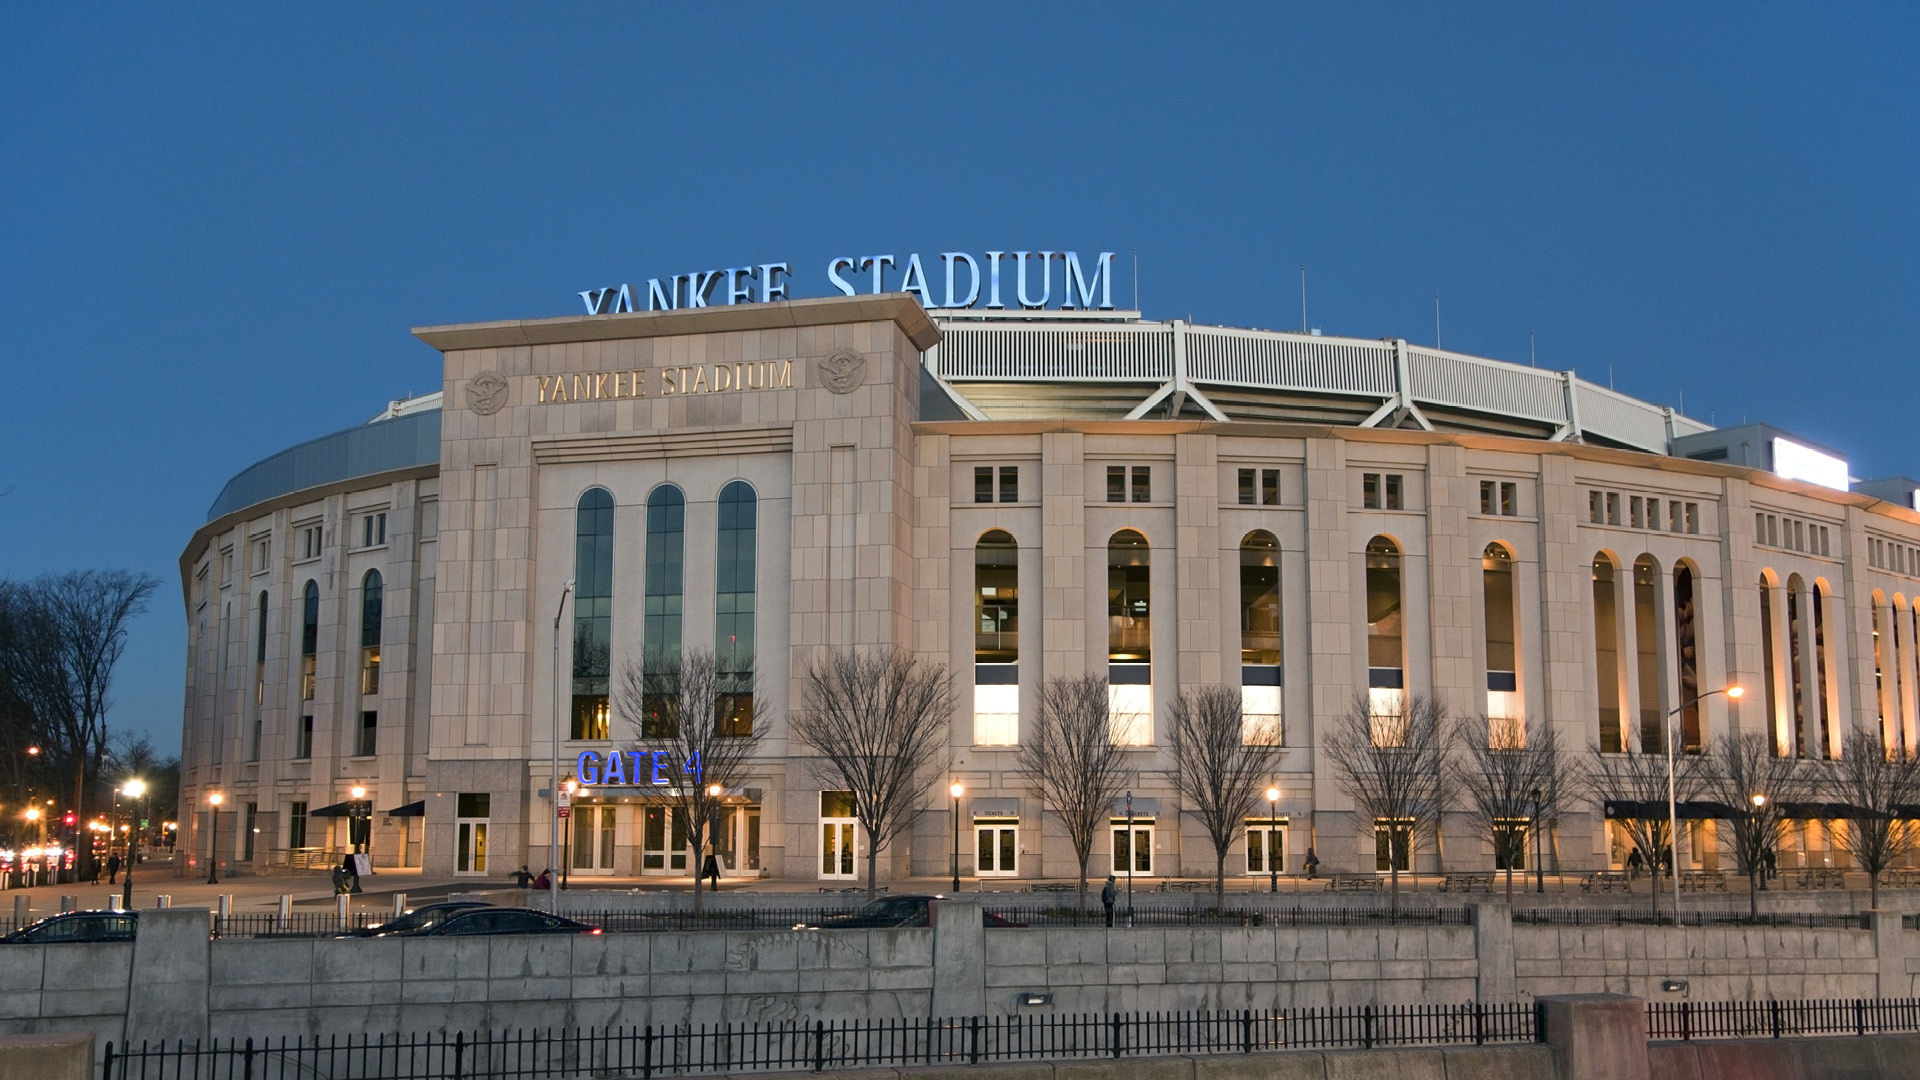 Yankee Stadium Will Host a Drive-In Movie and Concert Festival